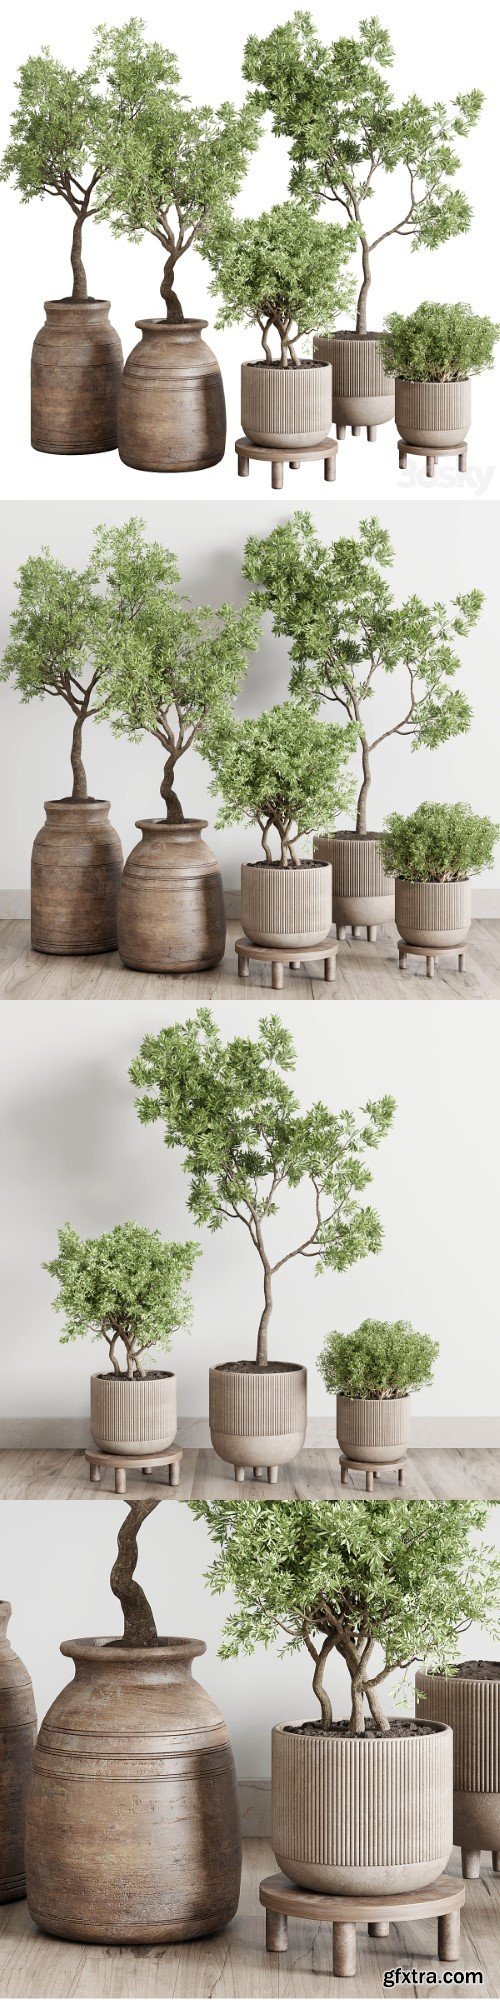 Wood collection indoor outdoor plant 141 | Vray